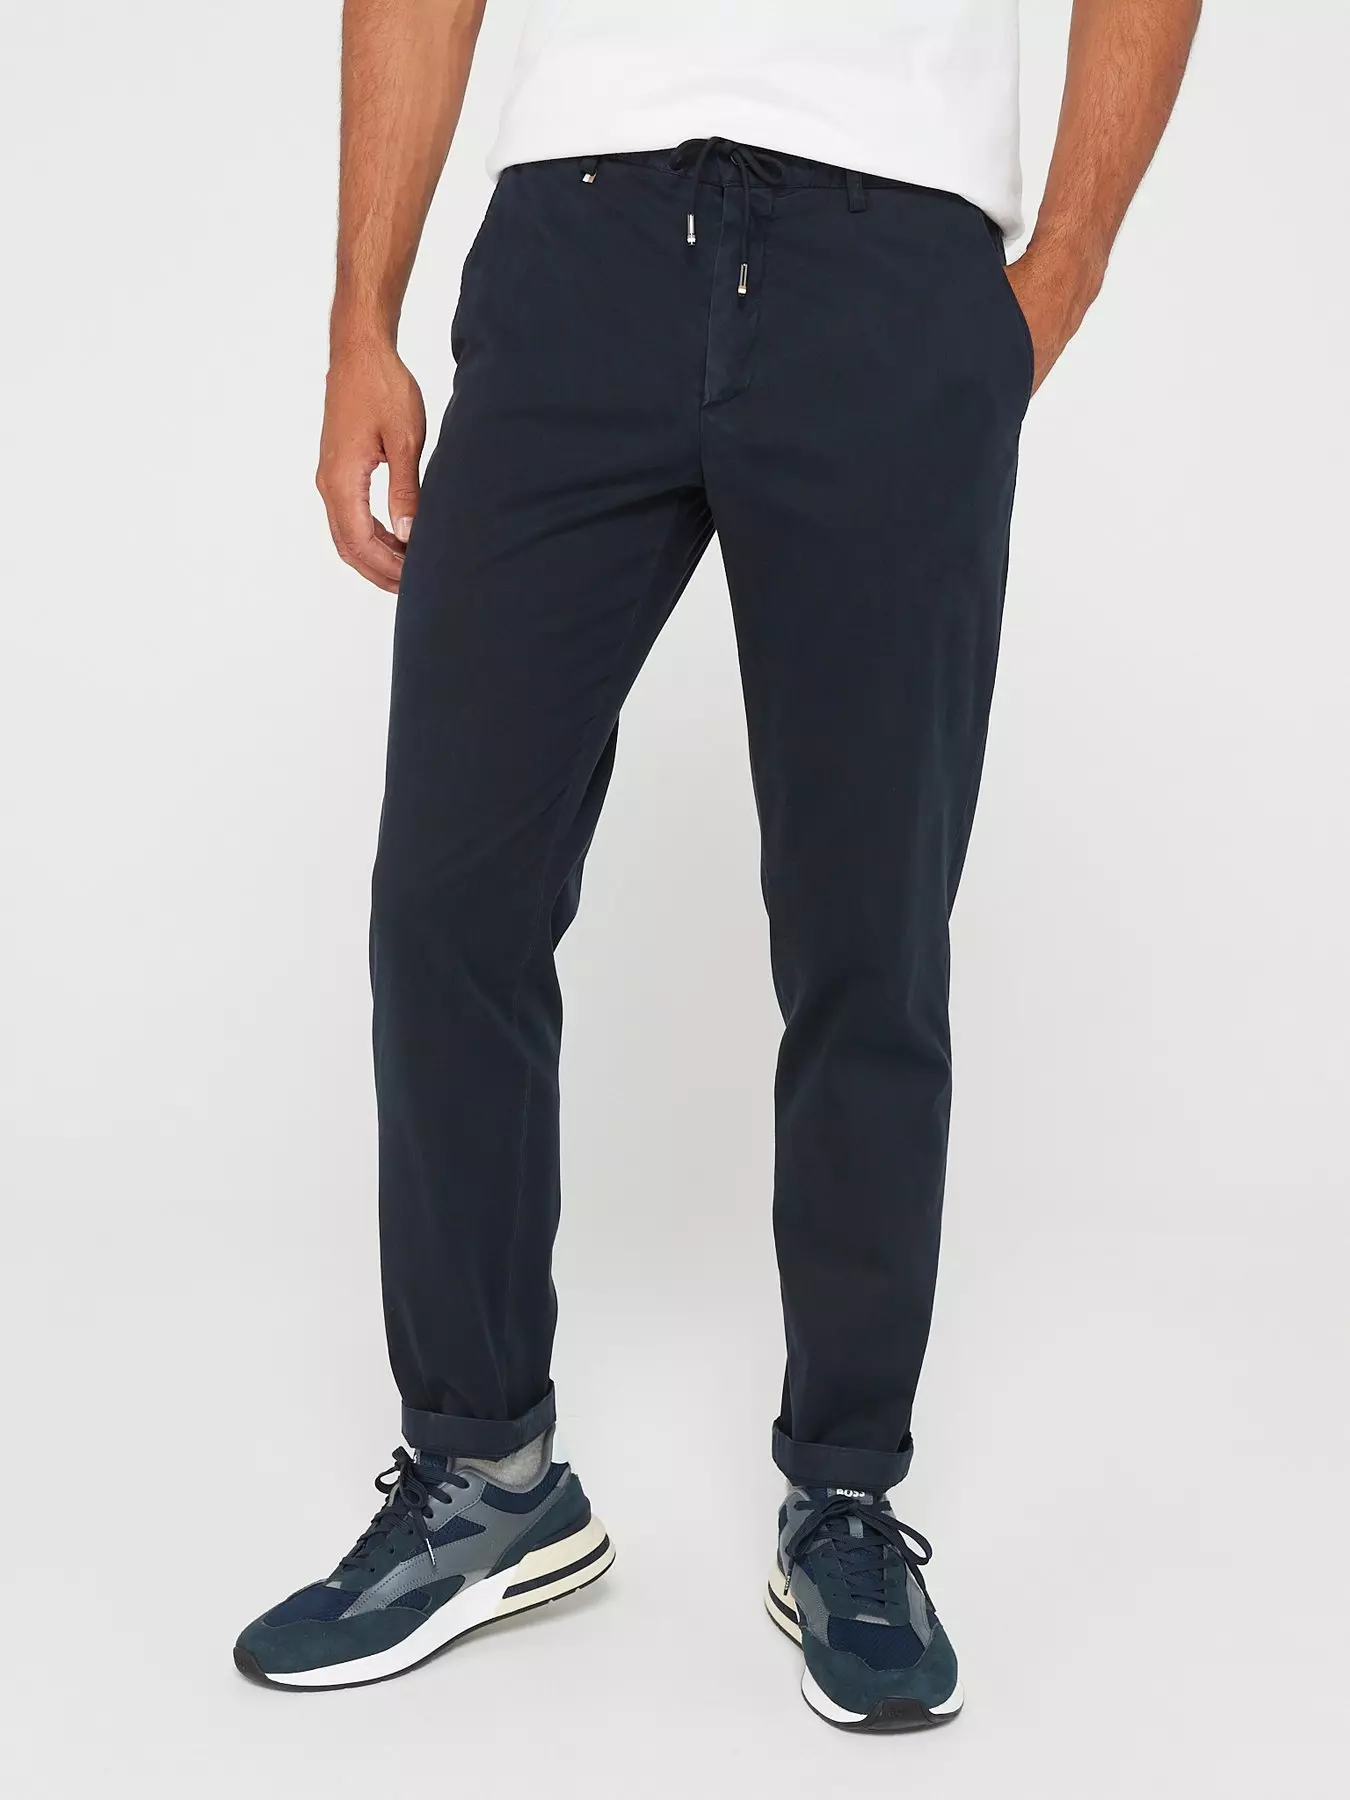 Latest Offers, Trousers & chinos, Men